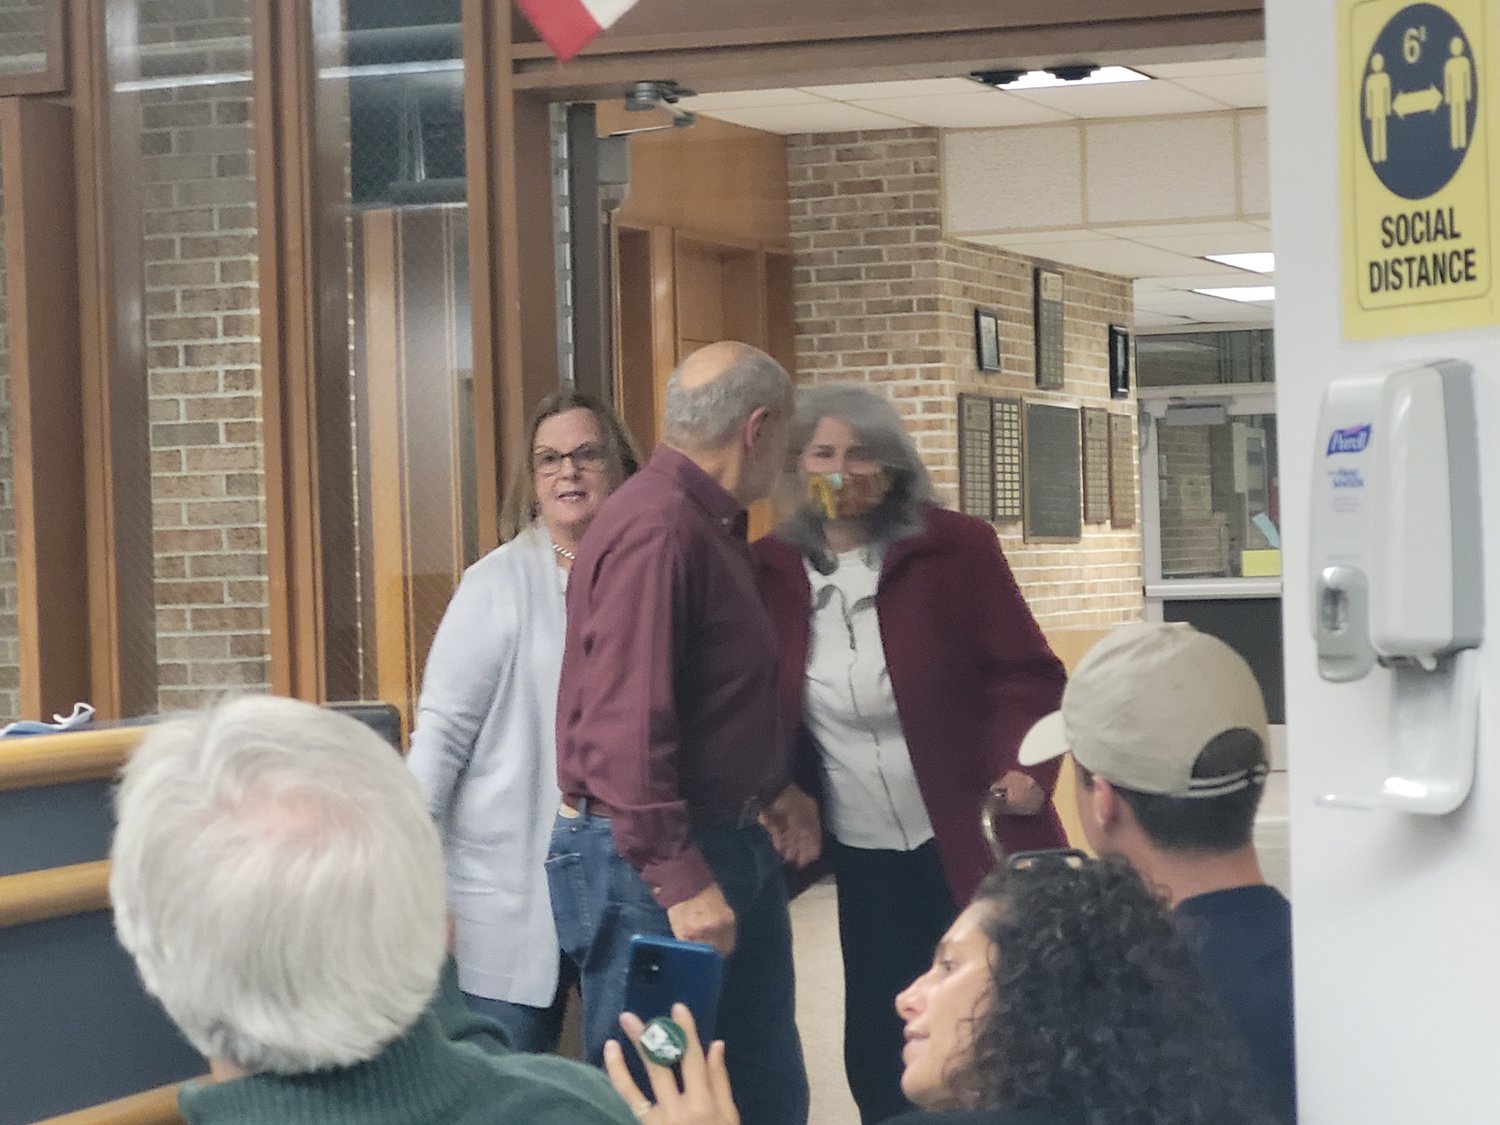 SURPRISE TRIBUTE: Matthew’s parents, Sallyann and Jack DiIorio, were shocked when they entered the library and saw the faces of friends and family. They thought they were going to dinner at a friend’s house.